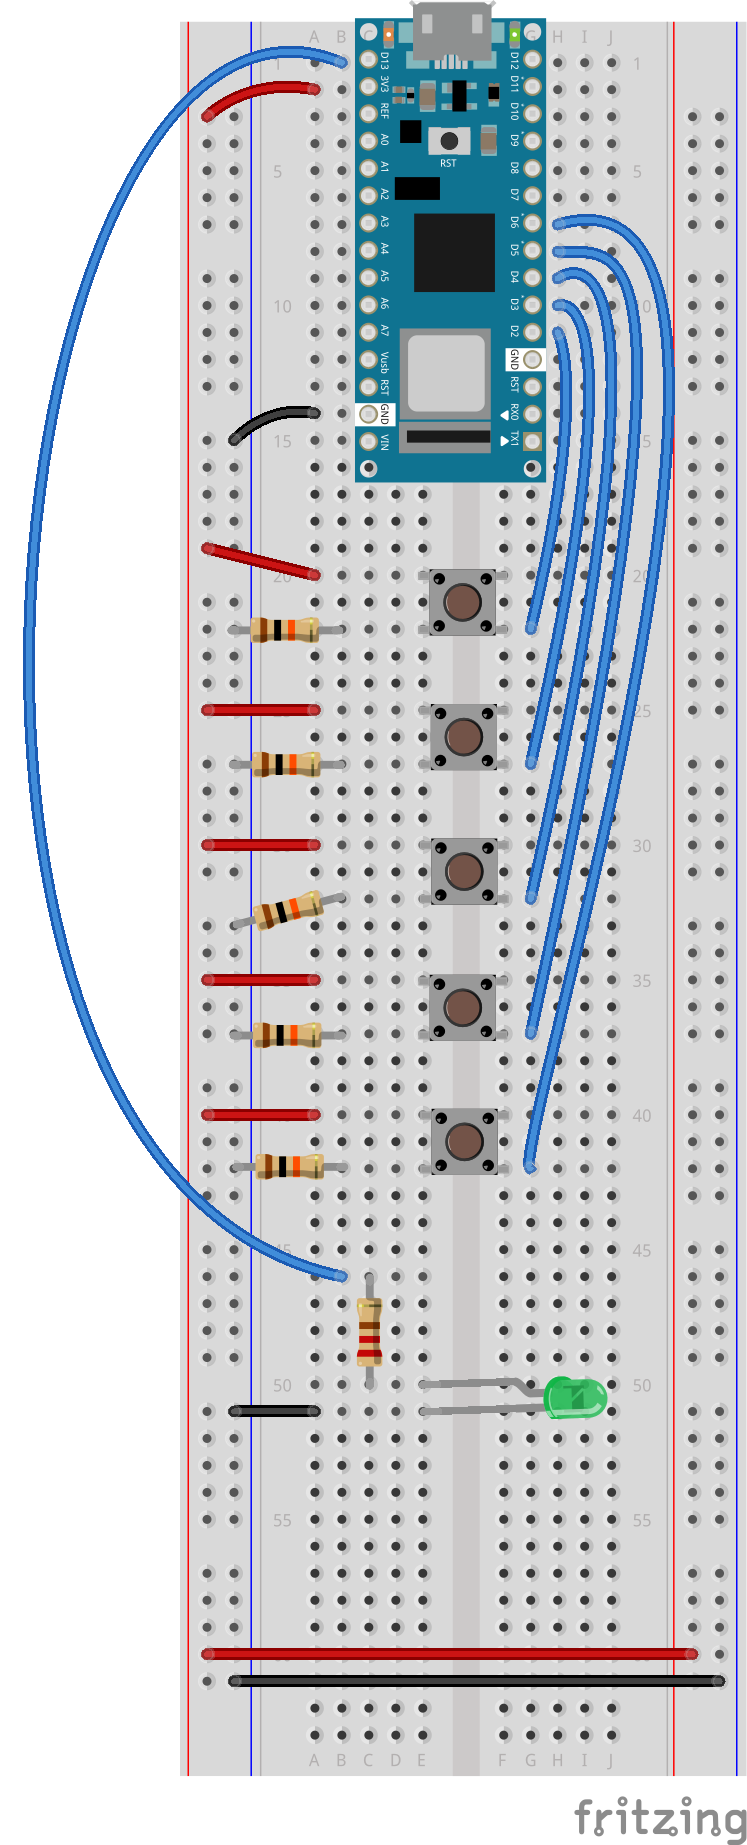 Breadboard drawing of an Arduino Nano connected to five pushbuttons. The pushbuttons straddle the center divide of the breadboard in rows 20-22, 25-27, 30-32, 35-37, and 40-42, respectively. 10-kilohm resistors connect the left side of each pushbutton to the breadboard's GND bus at rows 22, 27, 32, 37, 42. Blue wires connect the right side of each pushbutton at pins 22, 27, 32, 37, 42 to the arduino digital pins 2-6 respectively. Red wires connect the left side of each pushbutton to the voltage bus at rows 20, 25, 30, 35, 40. A blue wire connects the Arduino's digital pin 13 to a a 220-ohm resistor in series with a green LED. The anode of an LED is attached to the anode of the resistor, the cathode of the LED is attached to the ground bus with a black wire.